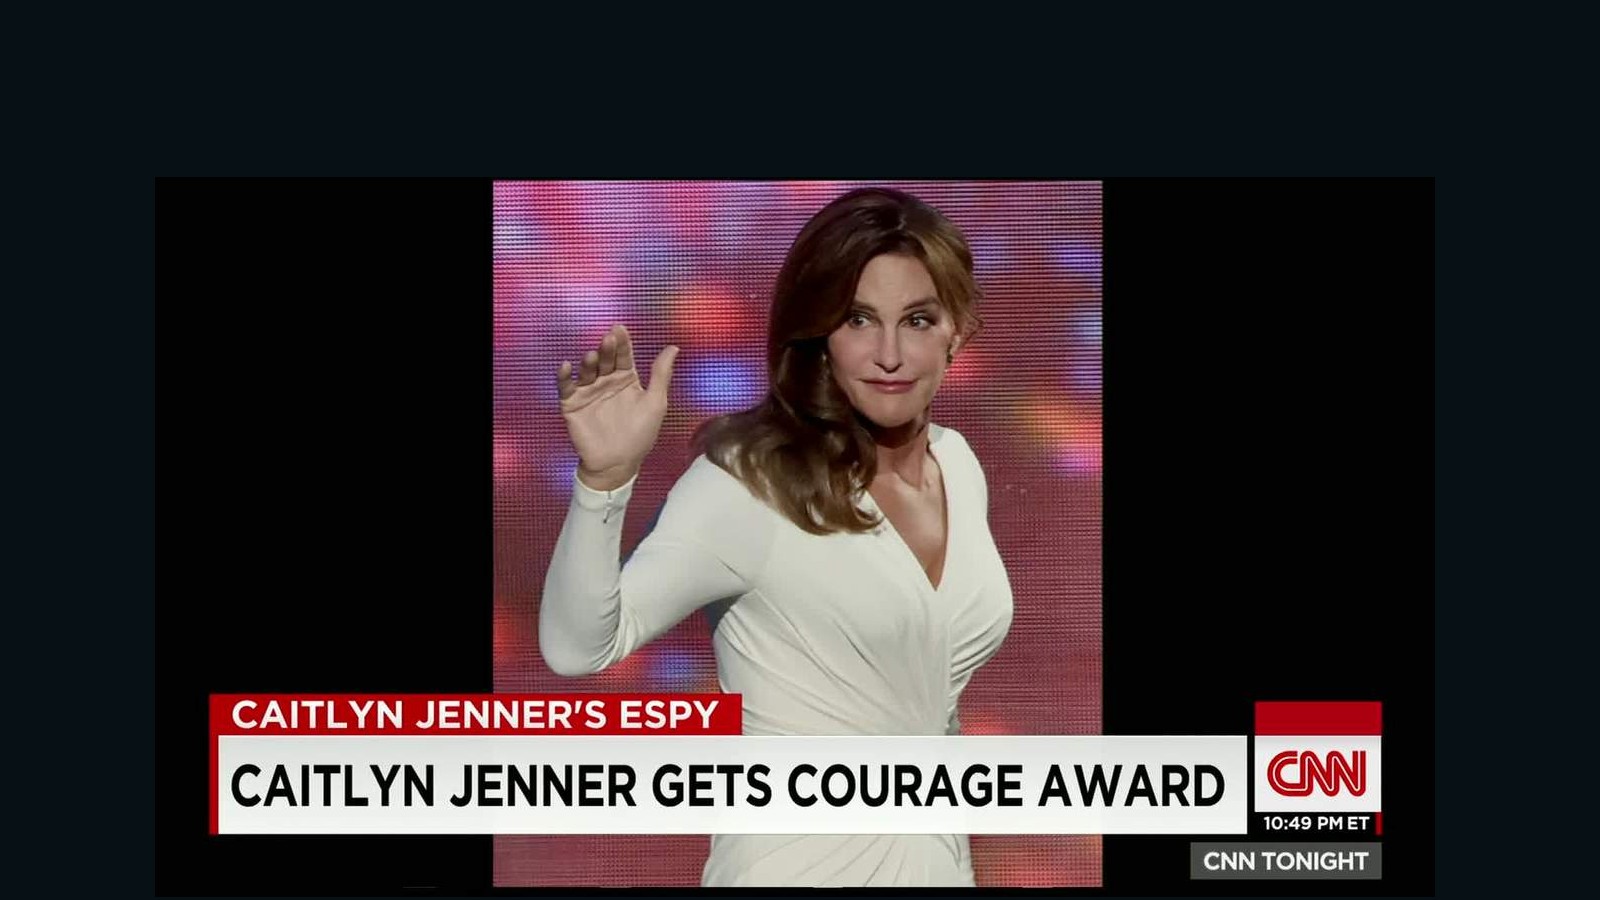 Caitlyn Jenner Fast Facts